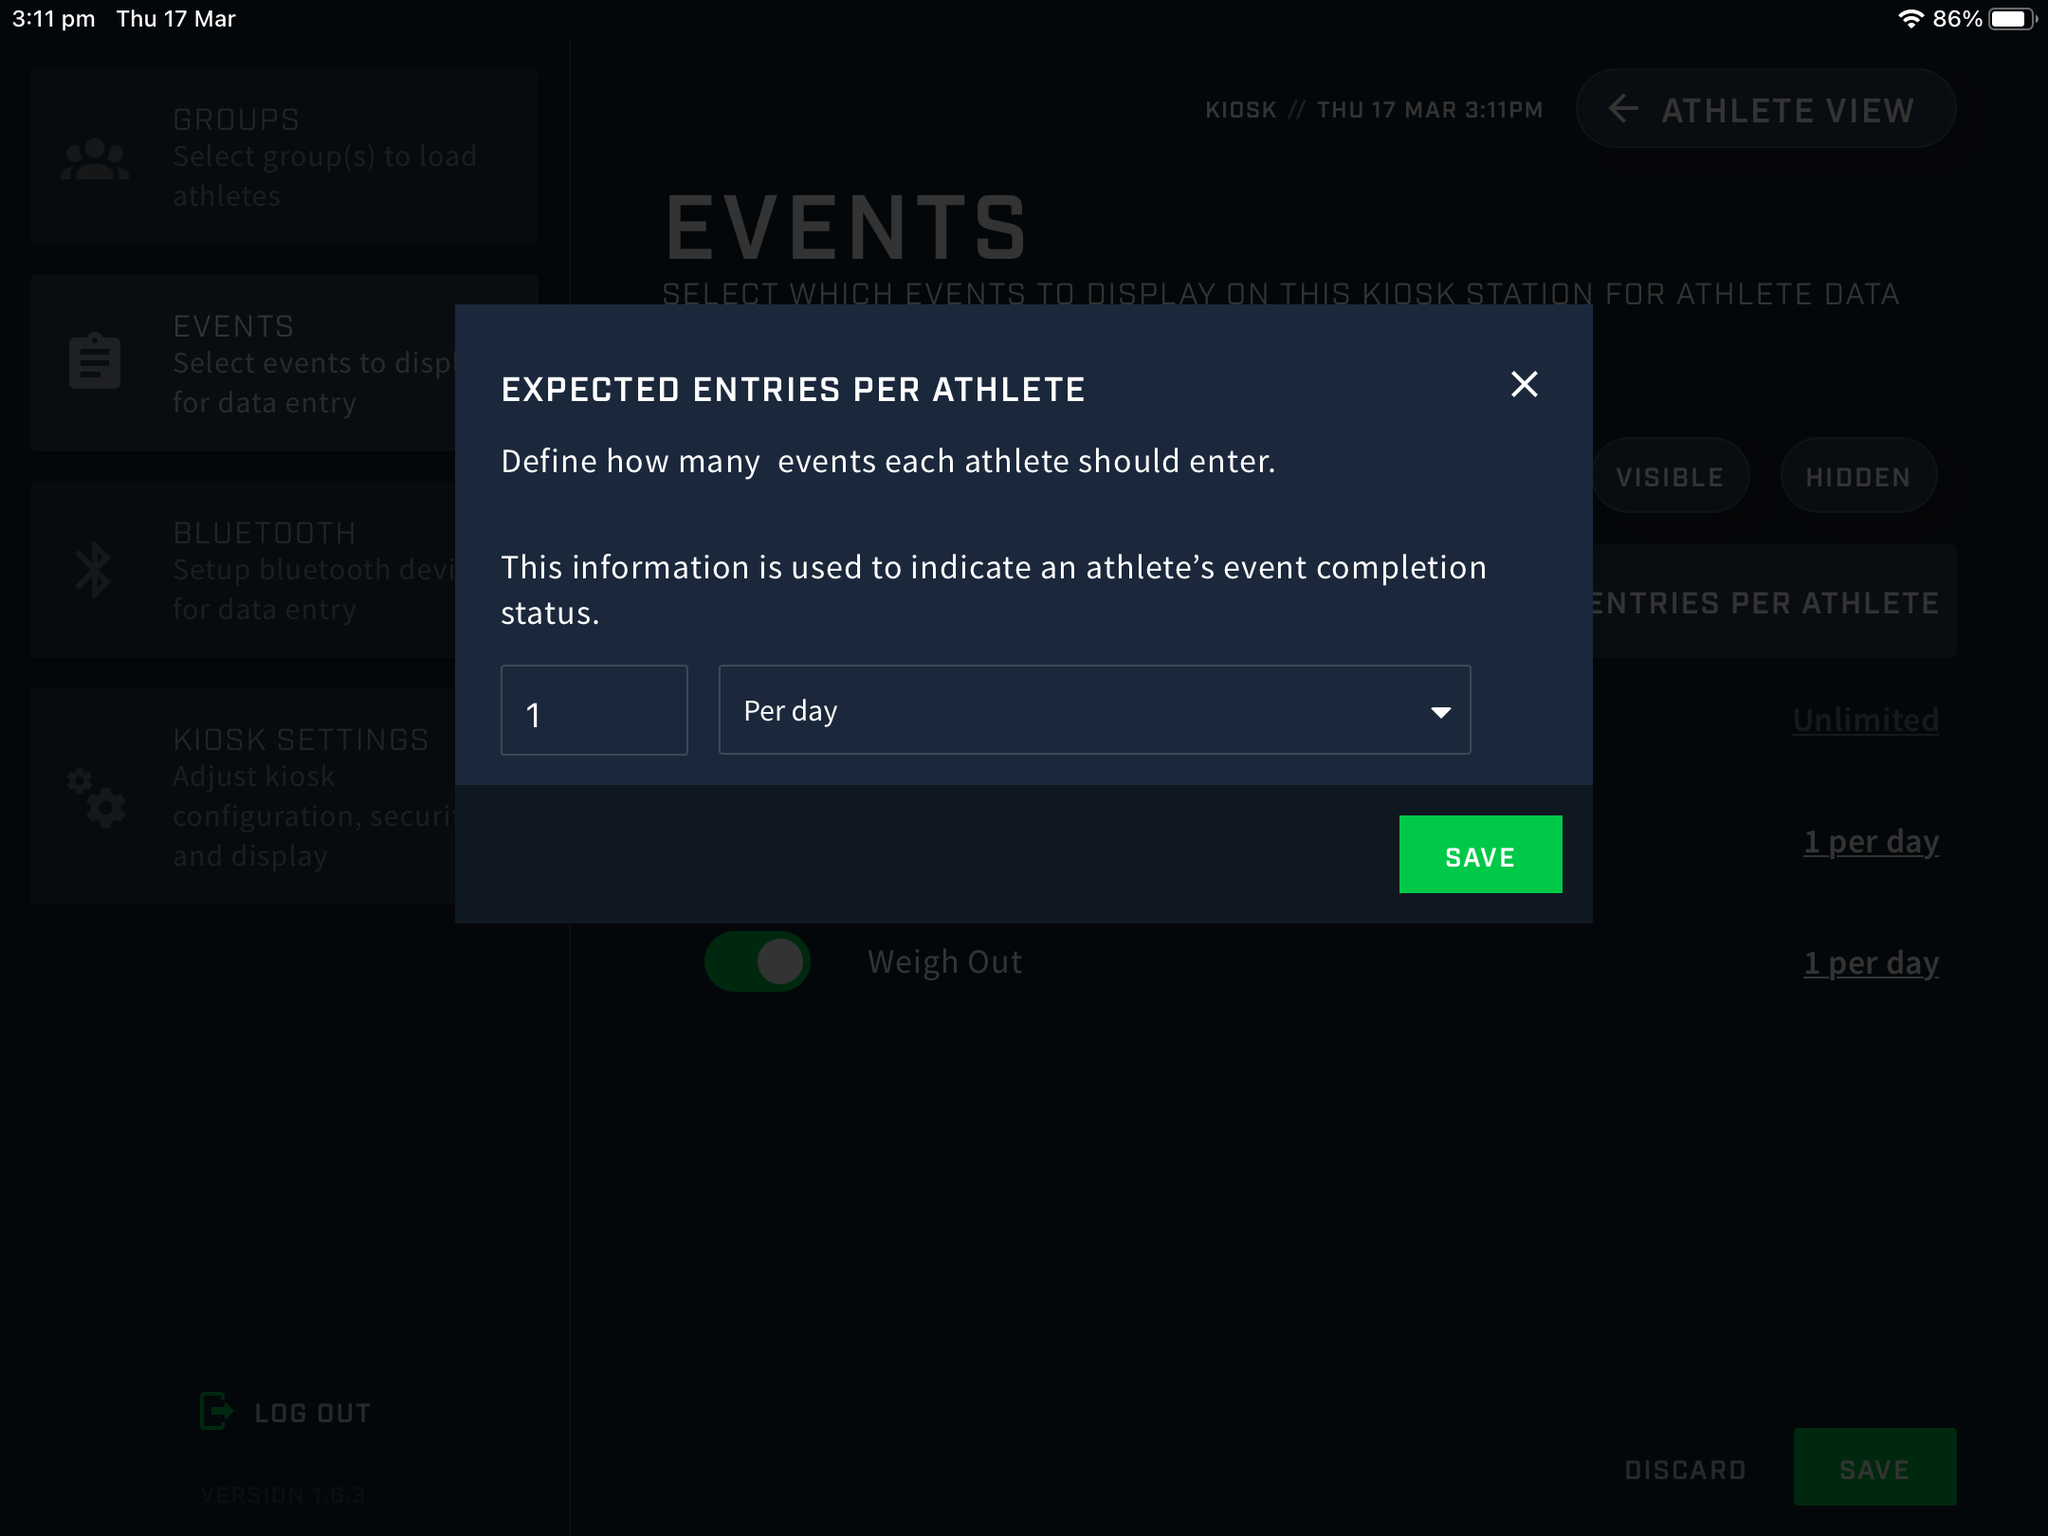 A screenshot showing the Expected entries per athlete pop-up on the Events settings screen on the Kiosk app.